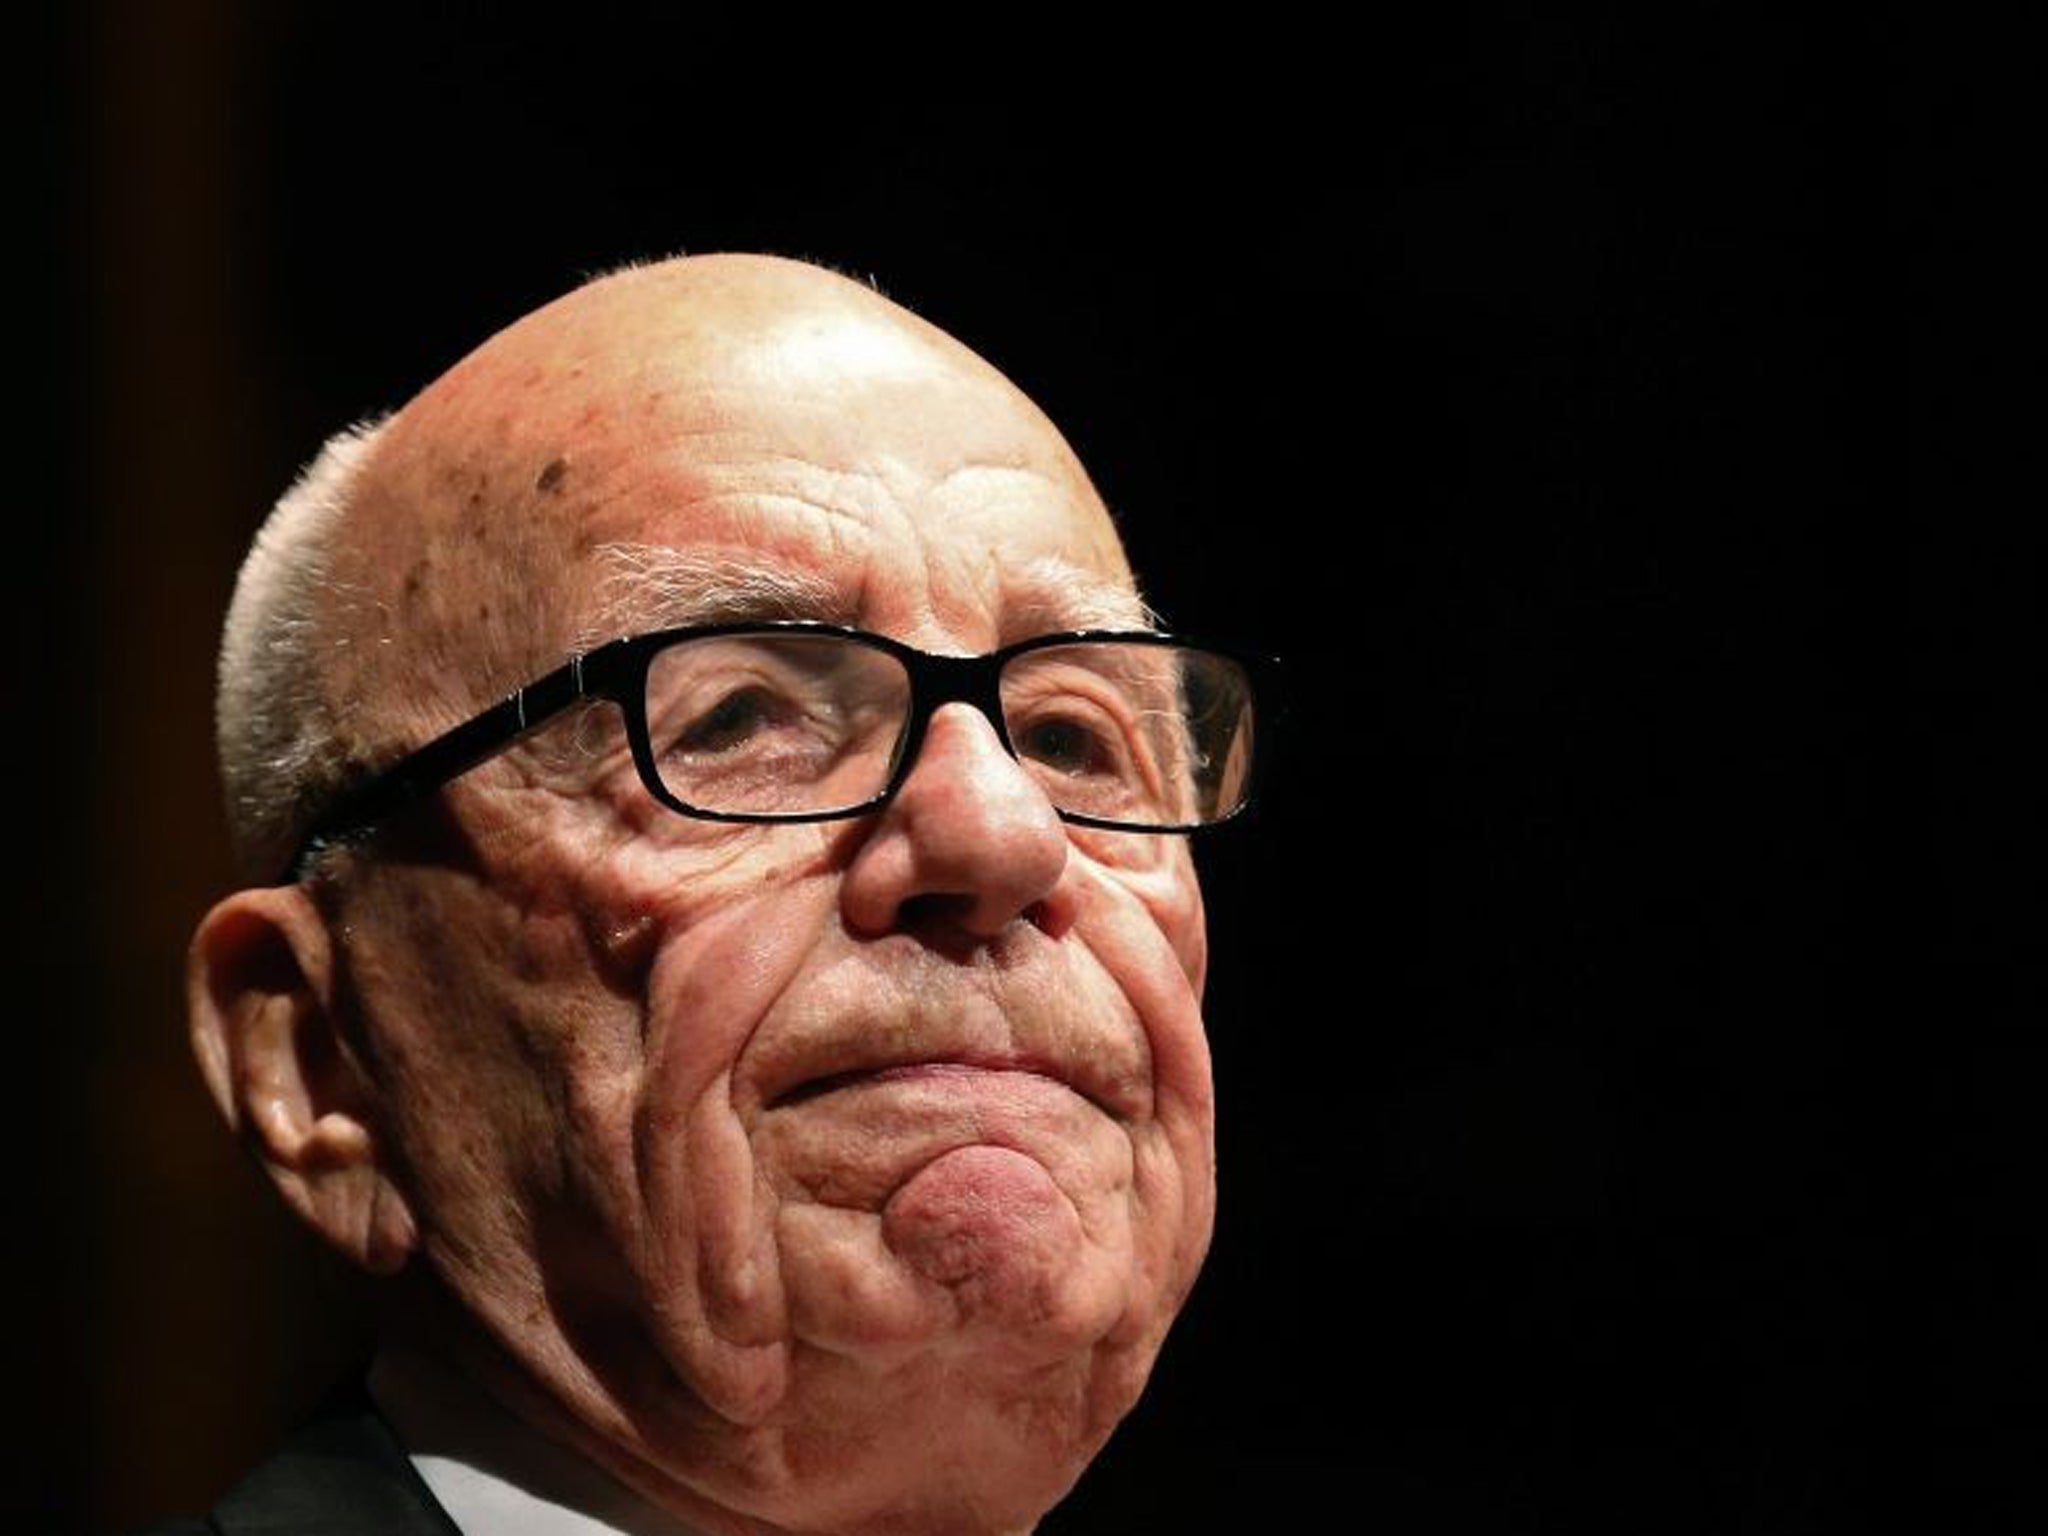 Rupert Murdoch's love life, rather than his business, is now under scrutiny